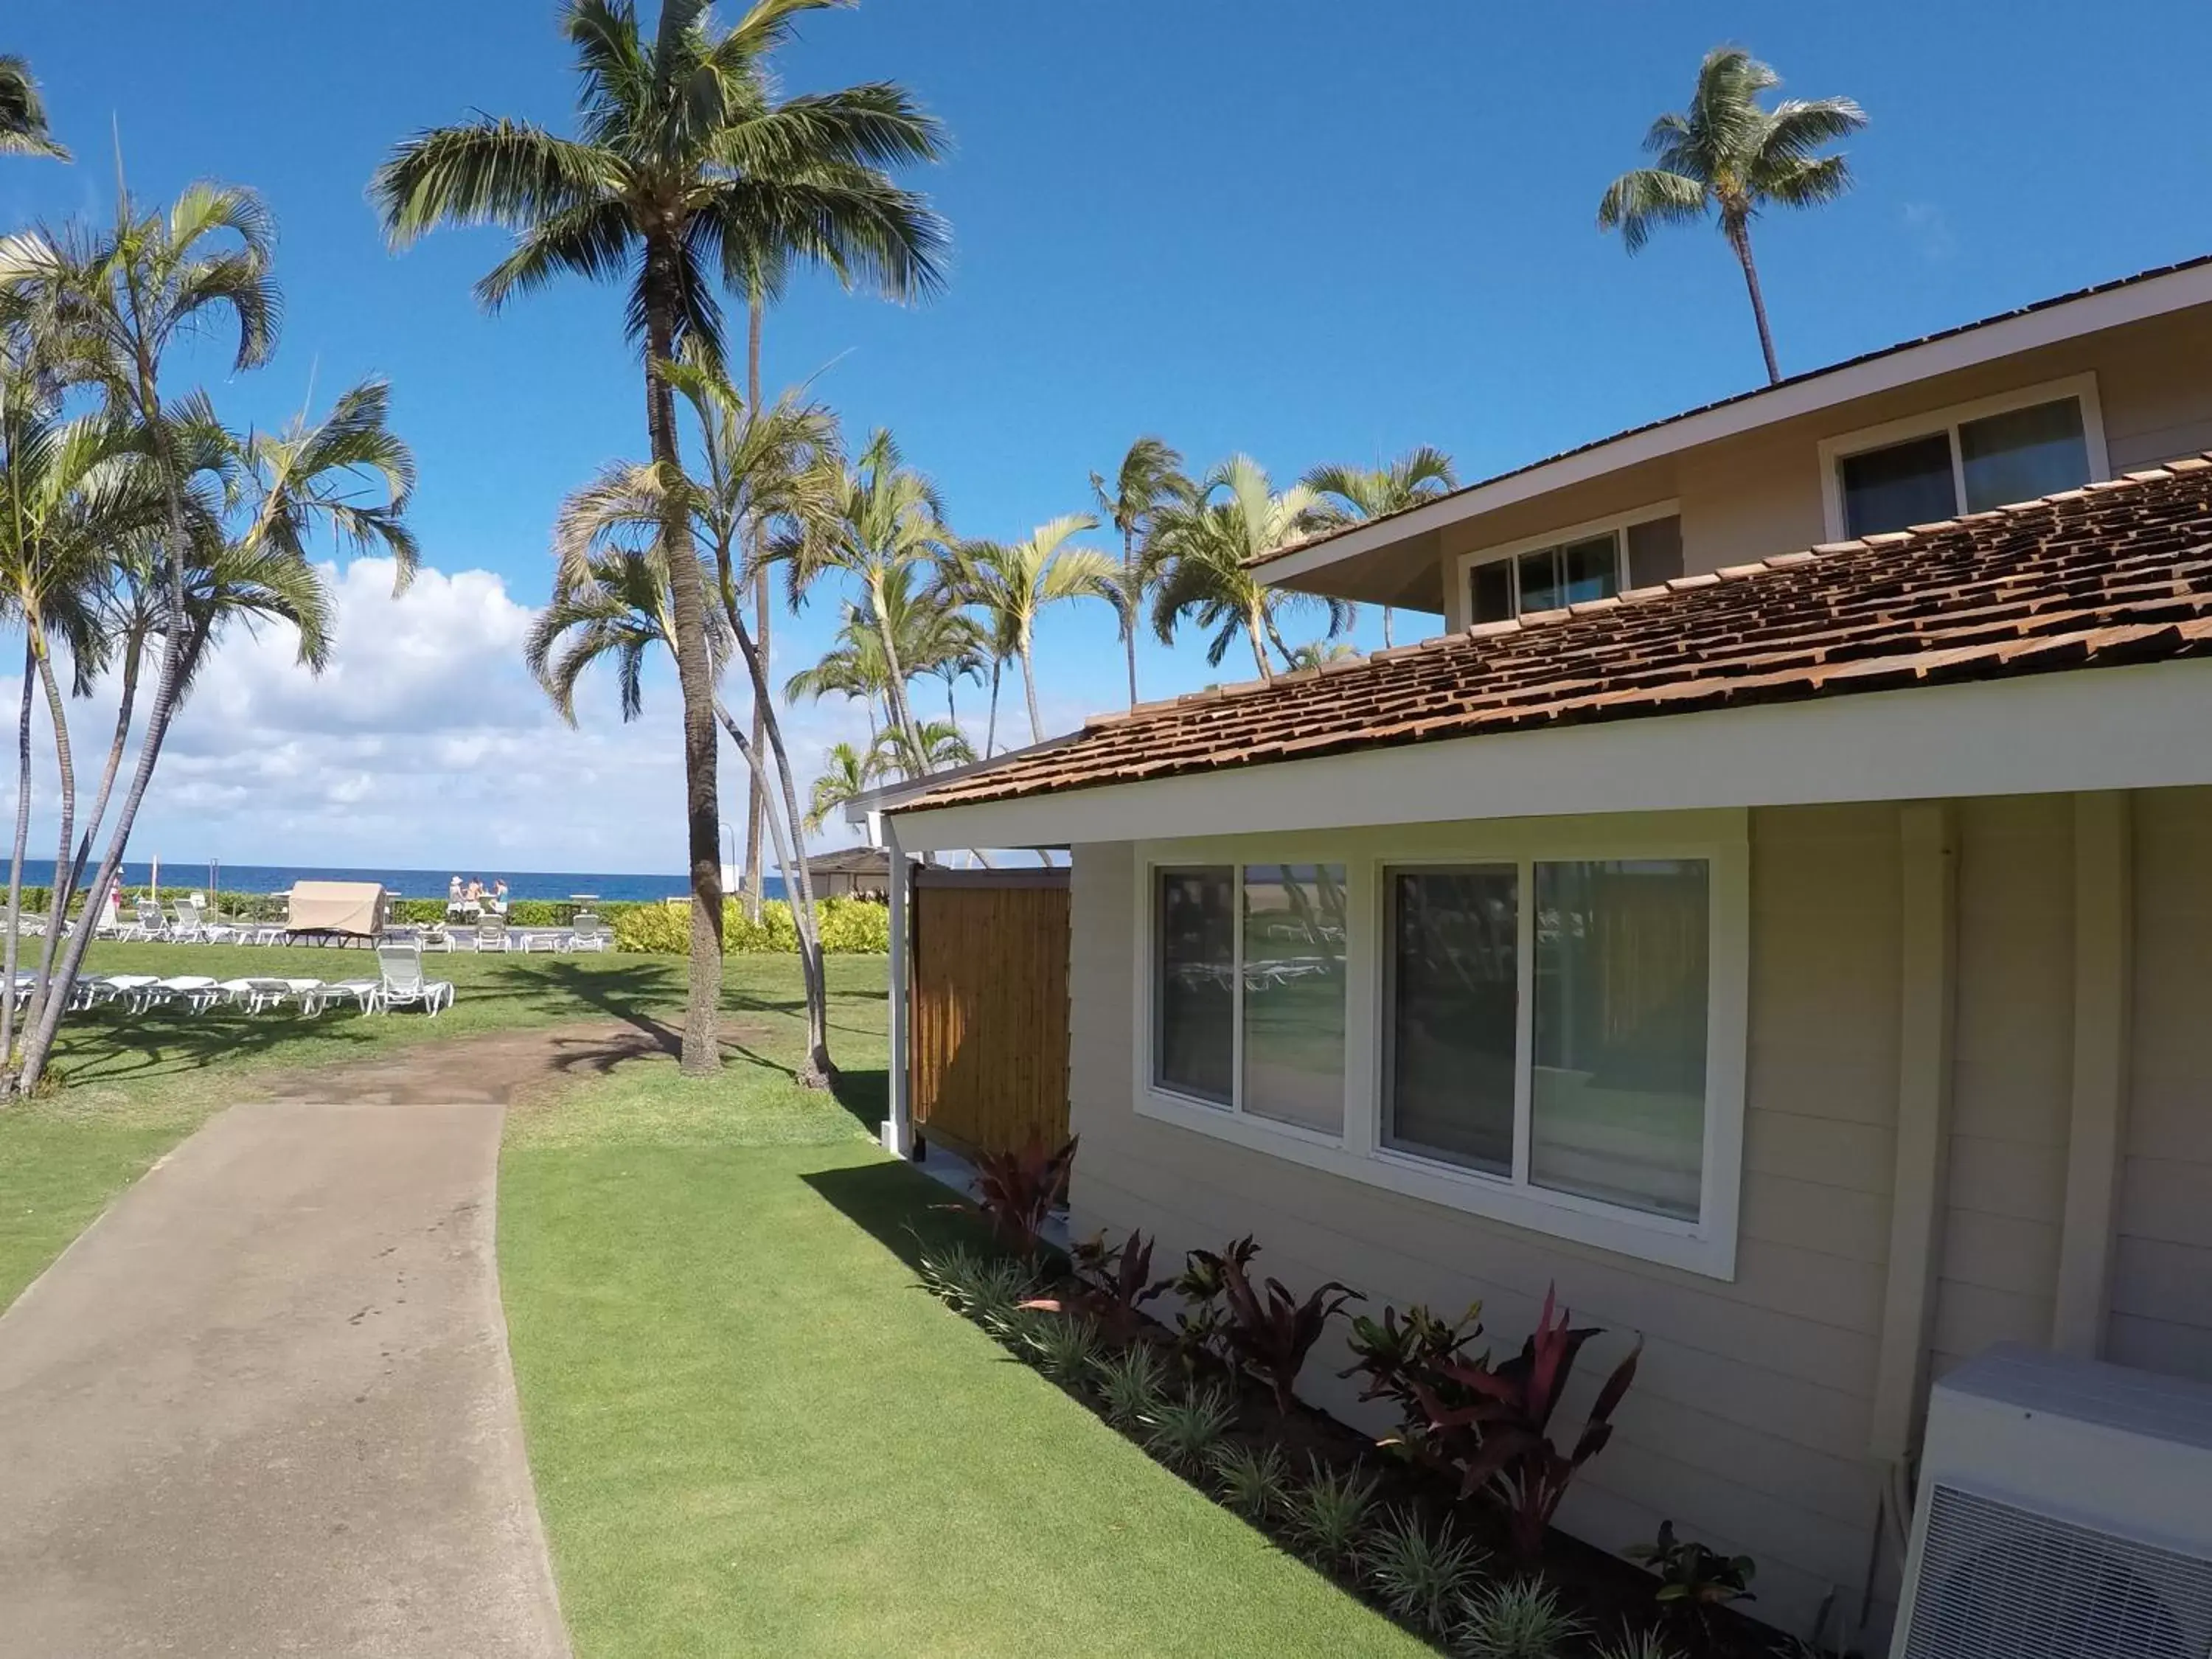 Deluxe Ocean Front Bungalow Room Doubles in Royal Lahaina Resort & Bungalows